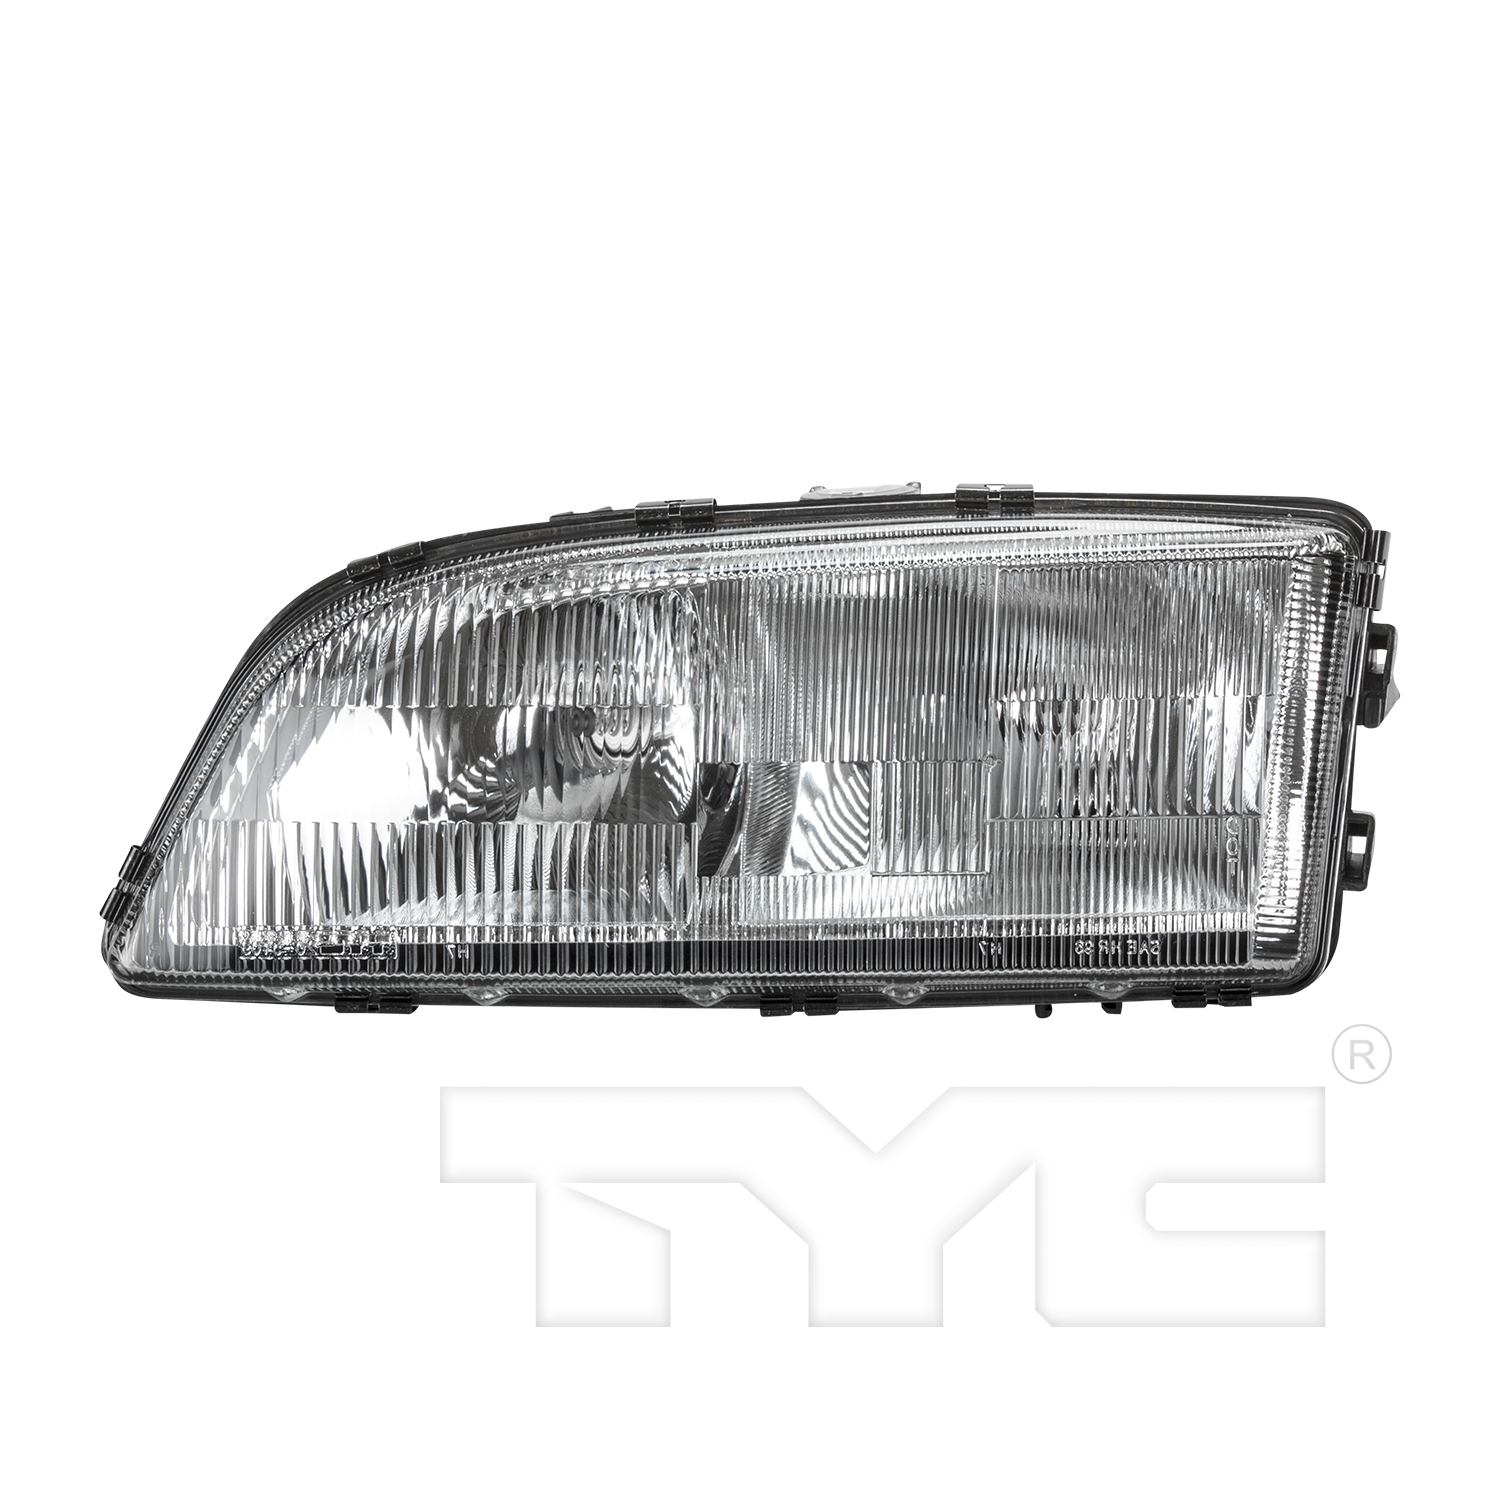 Aftermarket HEADLIGHTS for VOLVO - S70, S70,98-00,LT Headlamp assy composite